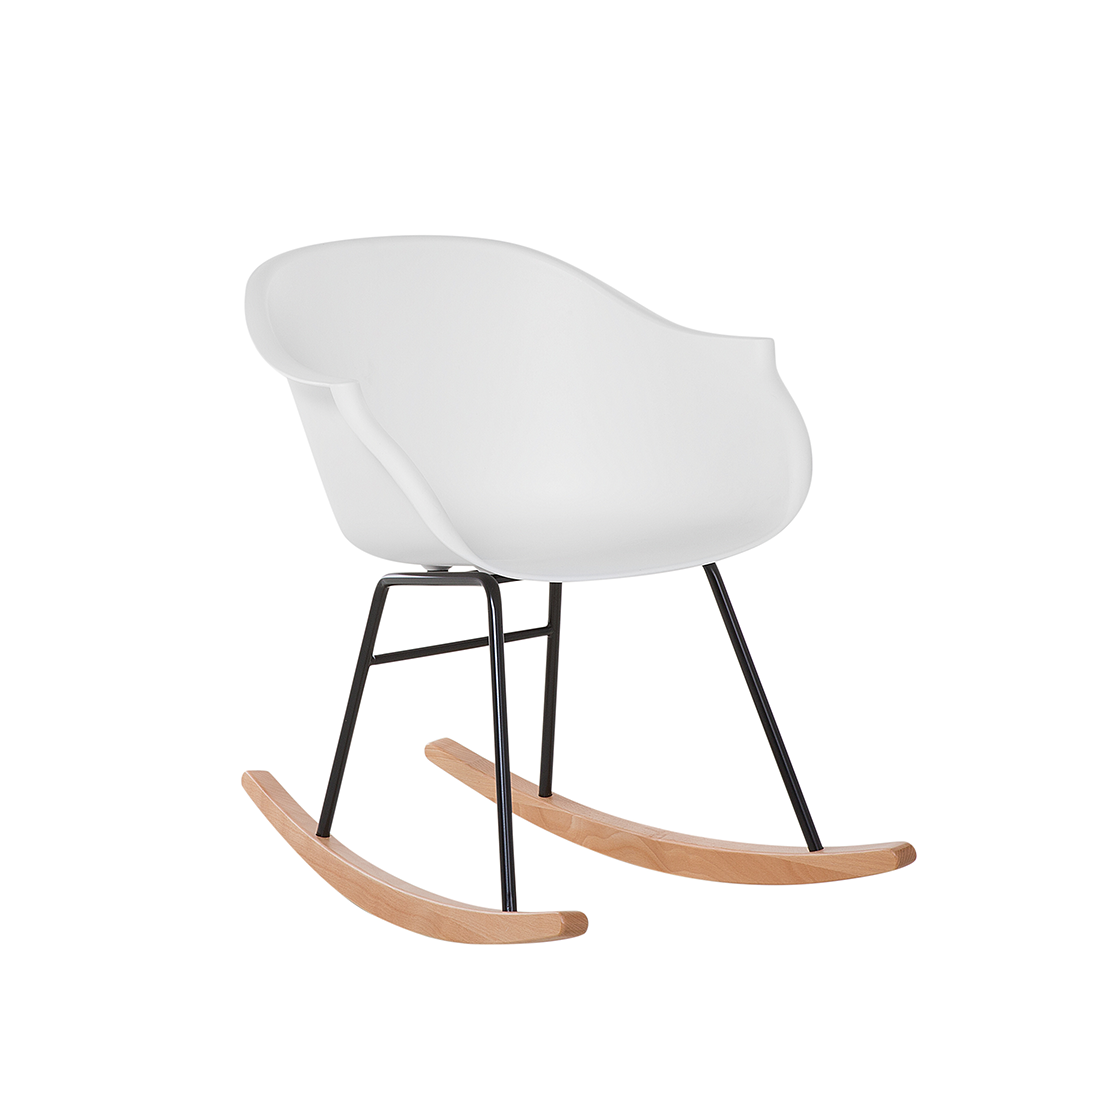 Beliani Rocking Chair White Synthetic Material Metal Legs Shell Seat Solid Wood Skates Modern Scandinavian Style